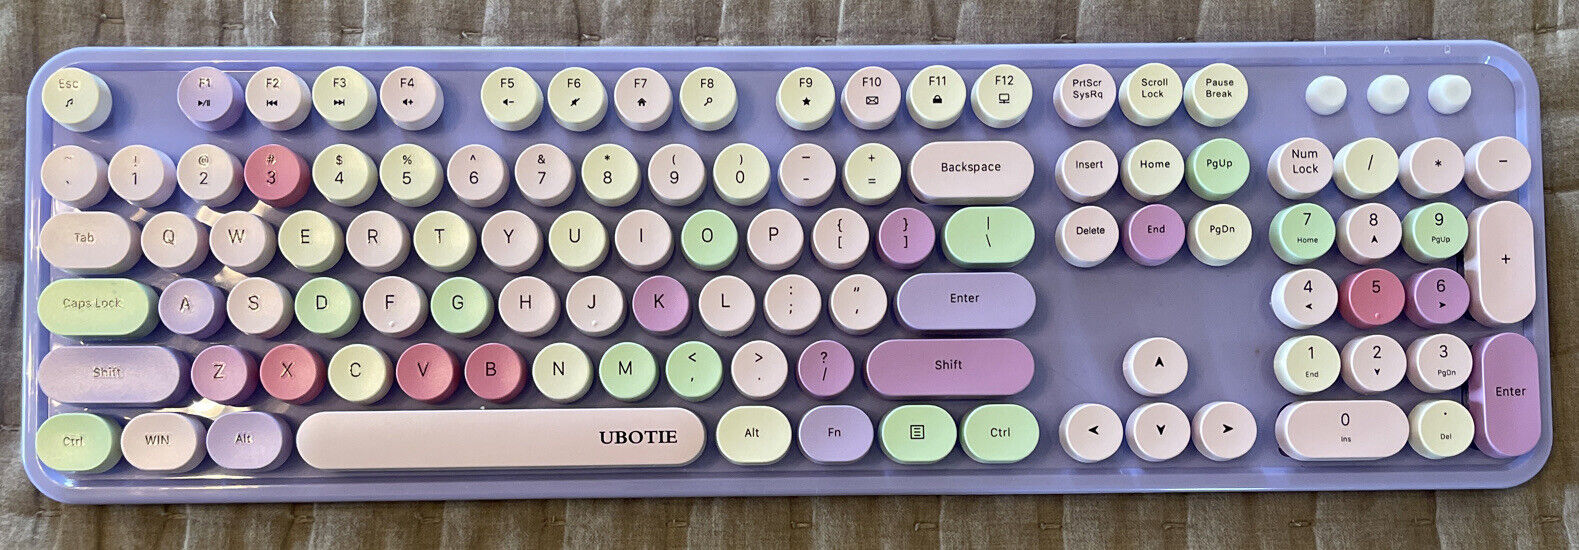 UBOTIE Sweet Portable Bluetooth Colorful Computer Wireless Keyboard Pastels R